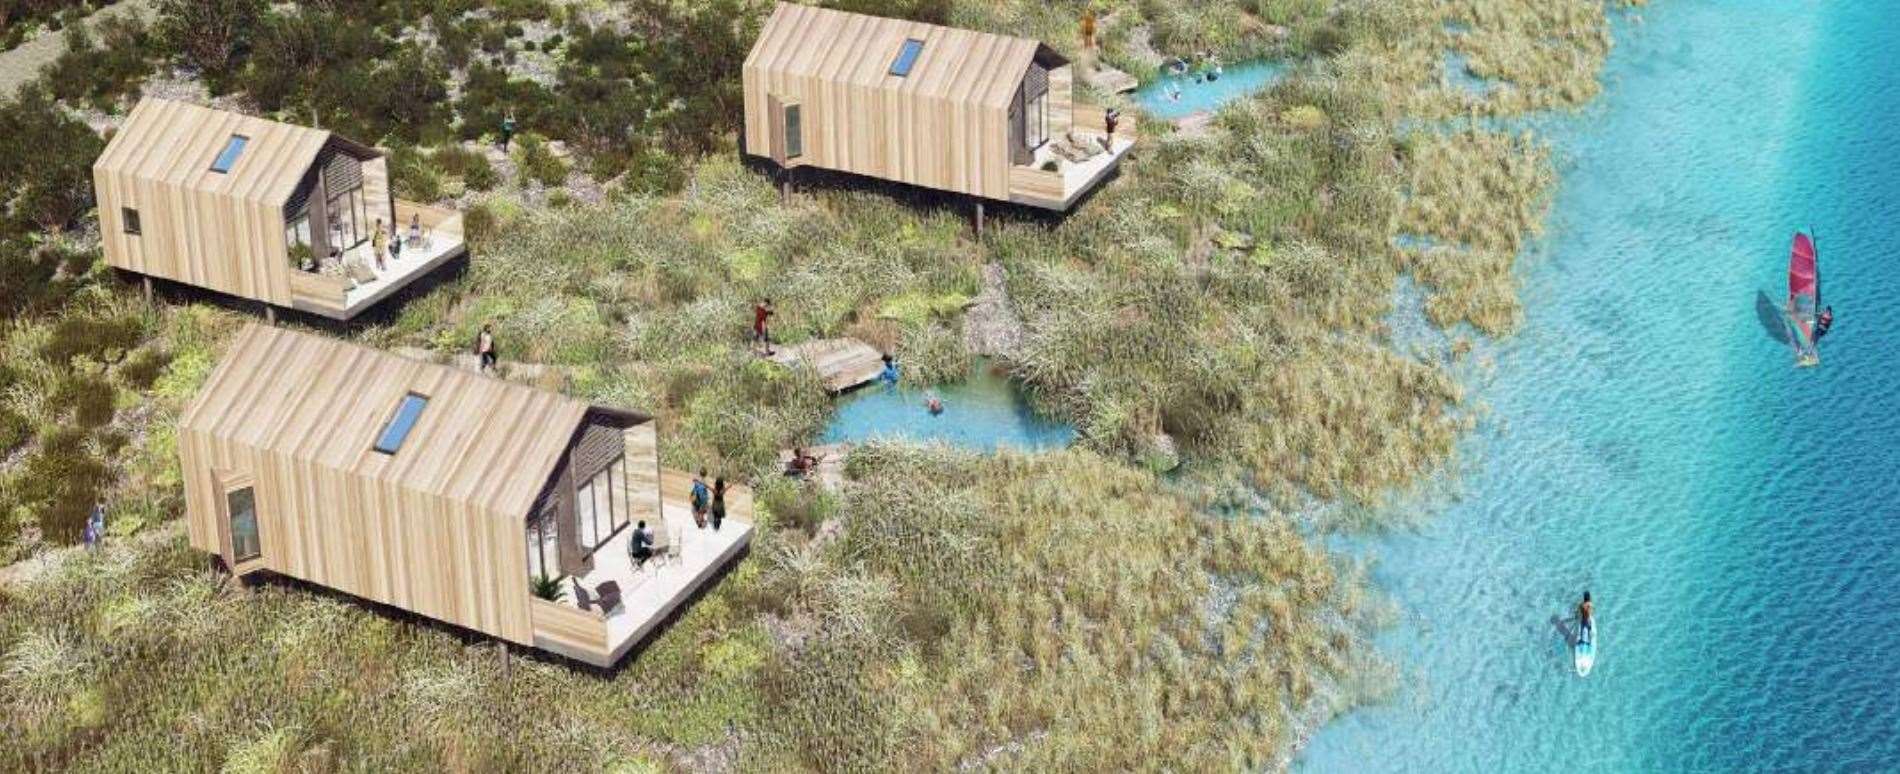 Floating pods will form part of the plans for holiday accommodation at St Andrews Lakes